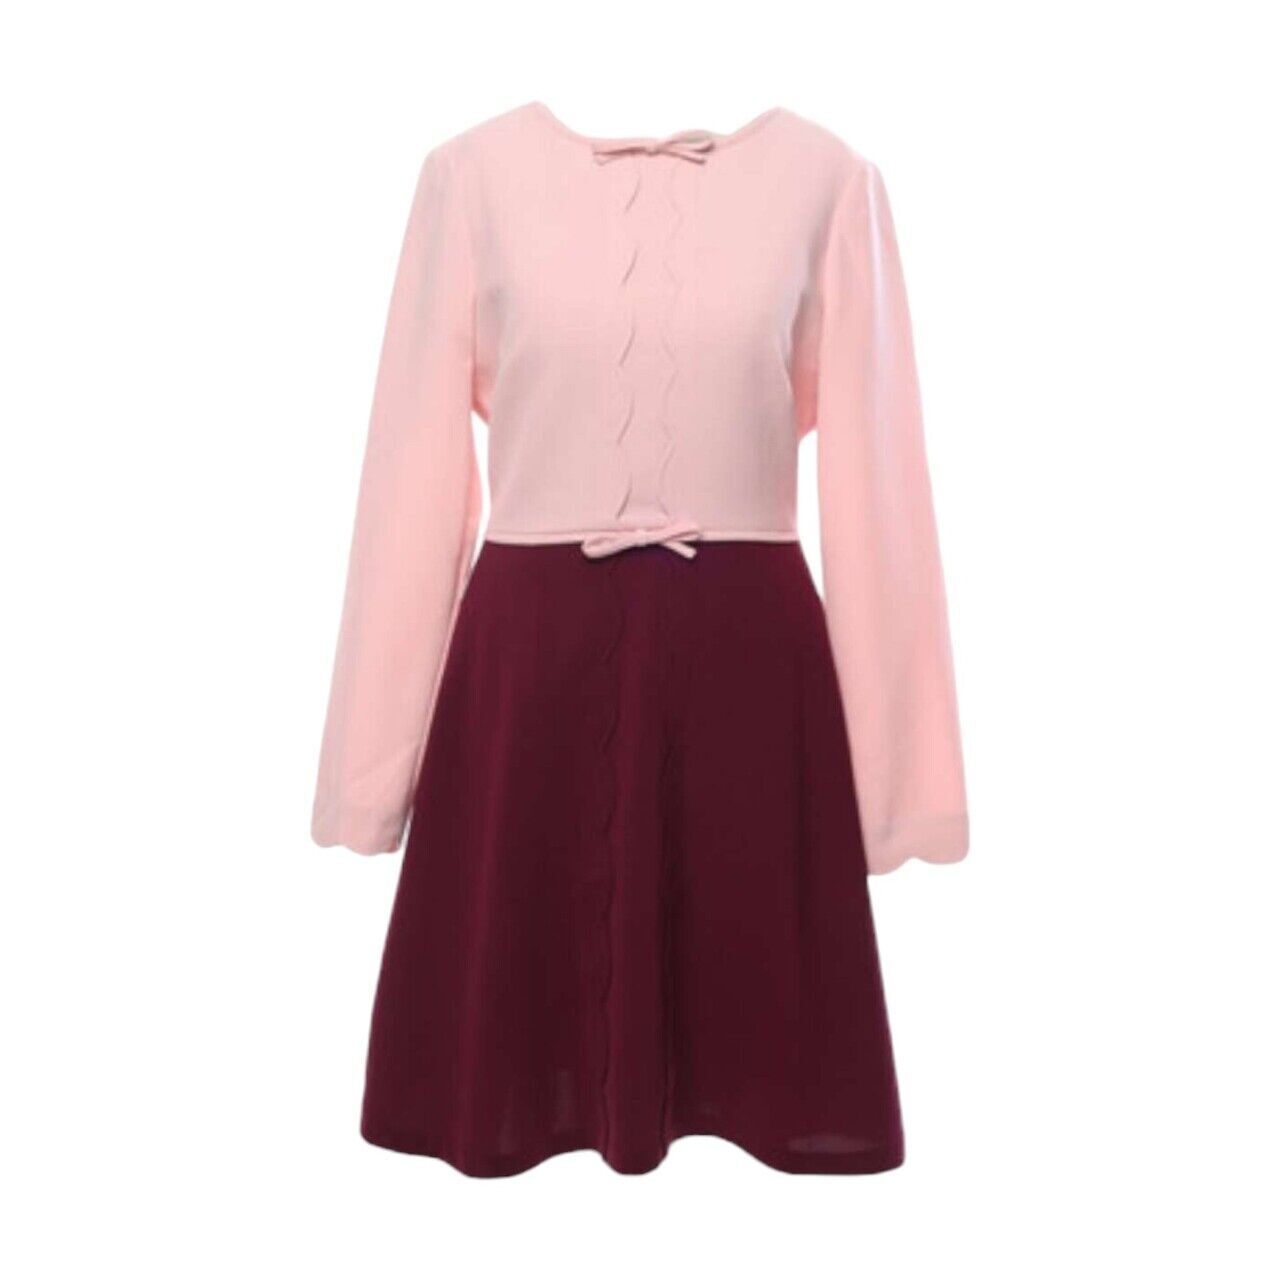 Ted Baker Dusty Pink & Brick Red Mini Dress